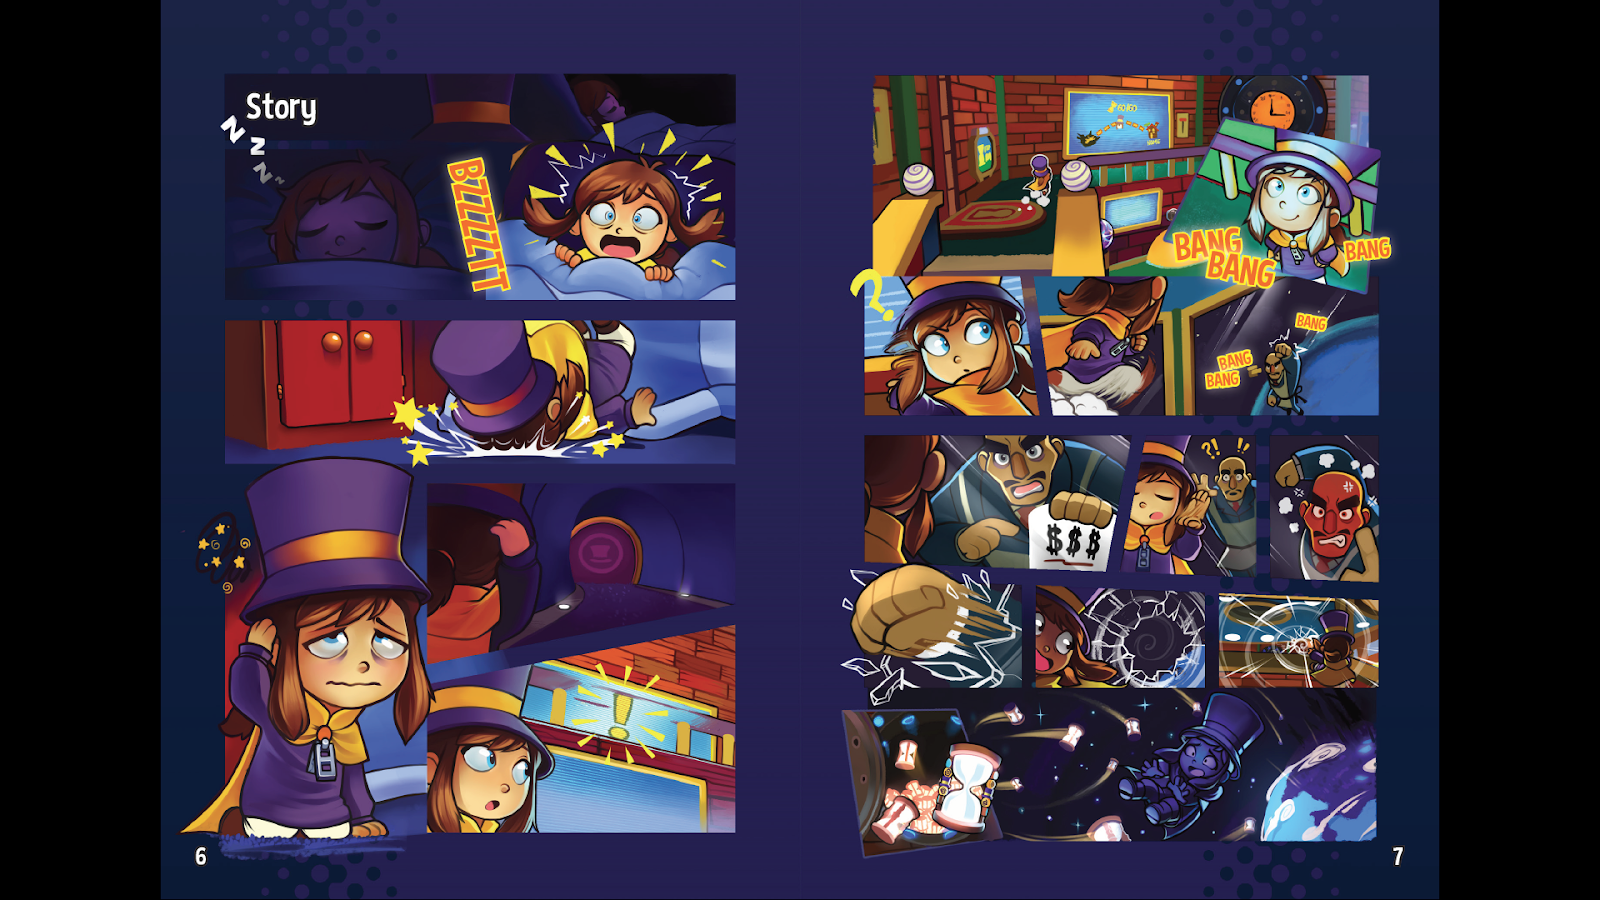 A Hat in Time - 3D collect-a-thon platformer by Gears for Breakfast —  Kickstarter